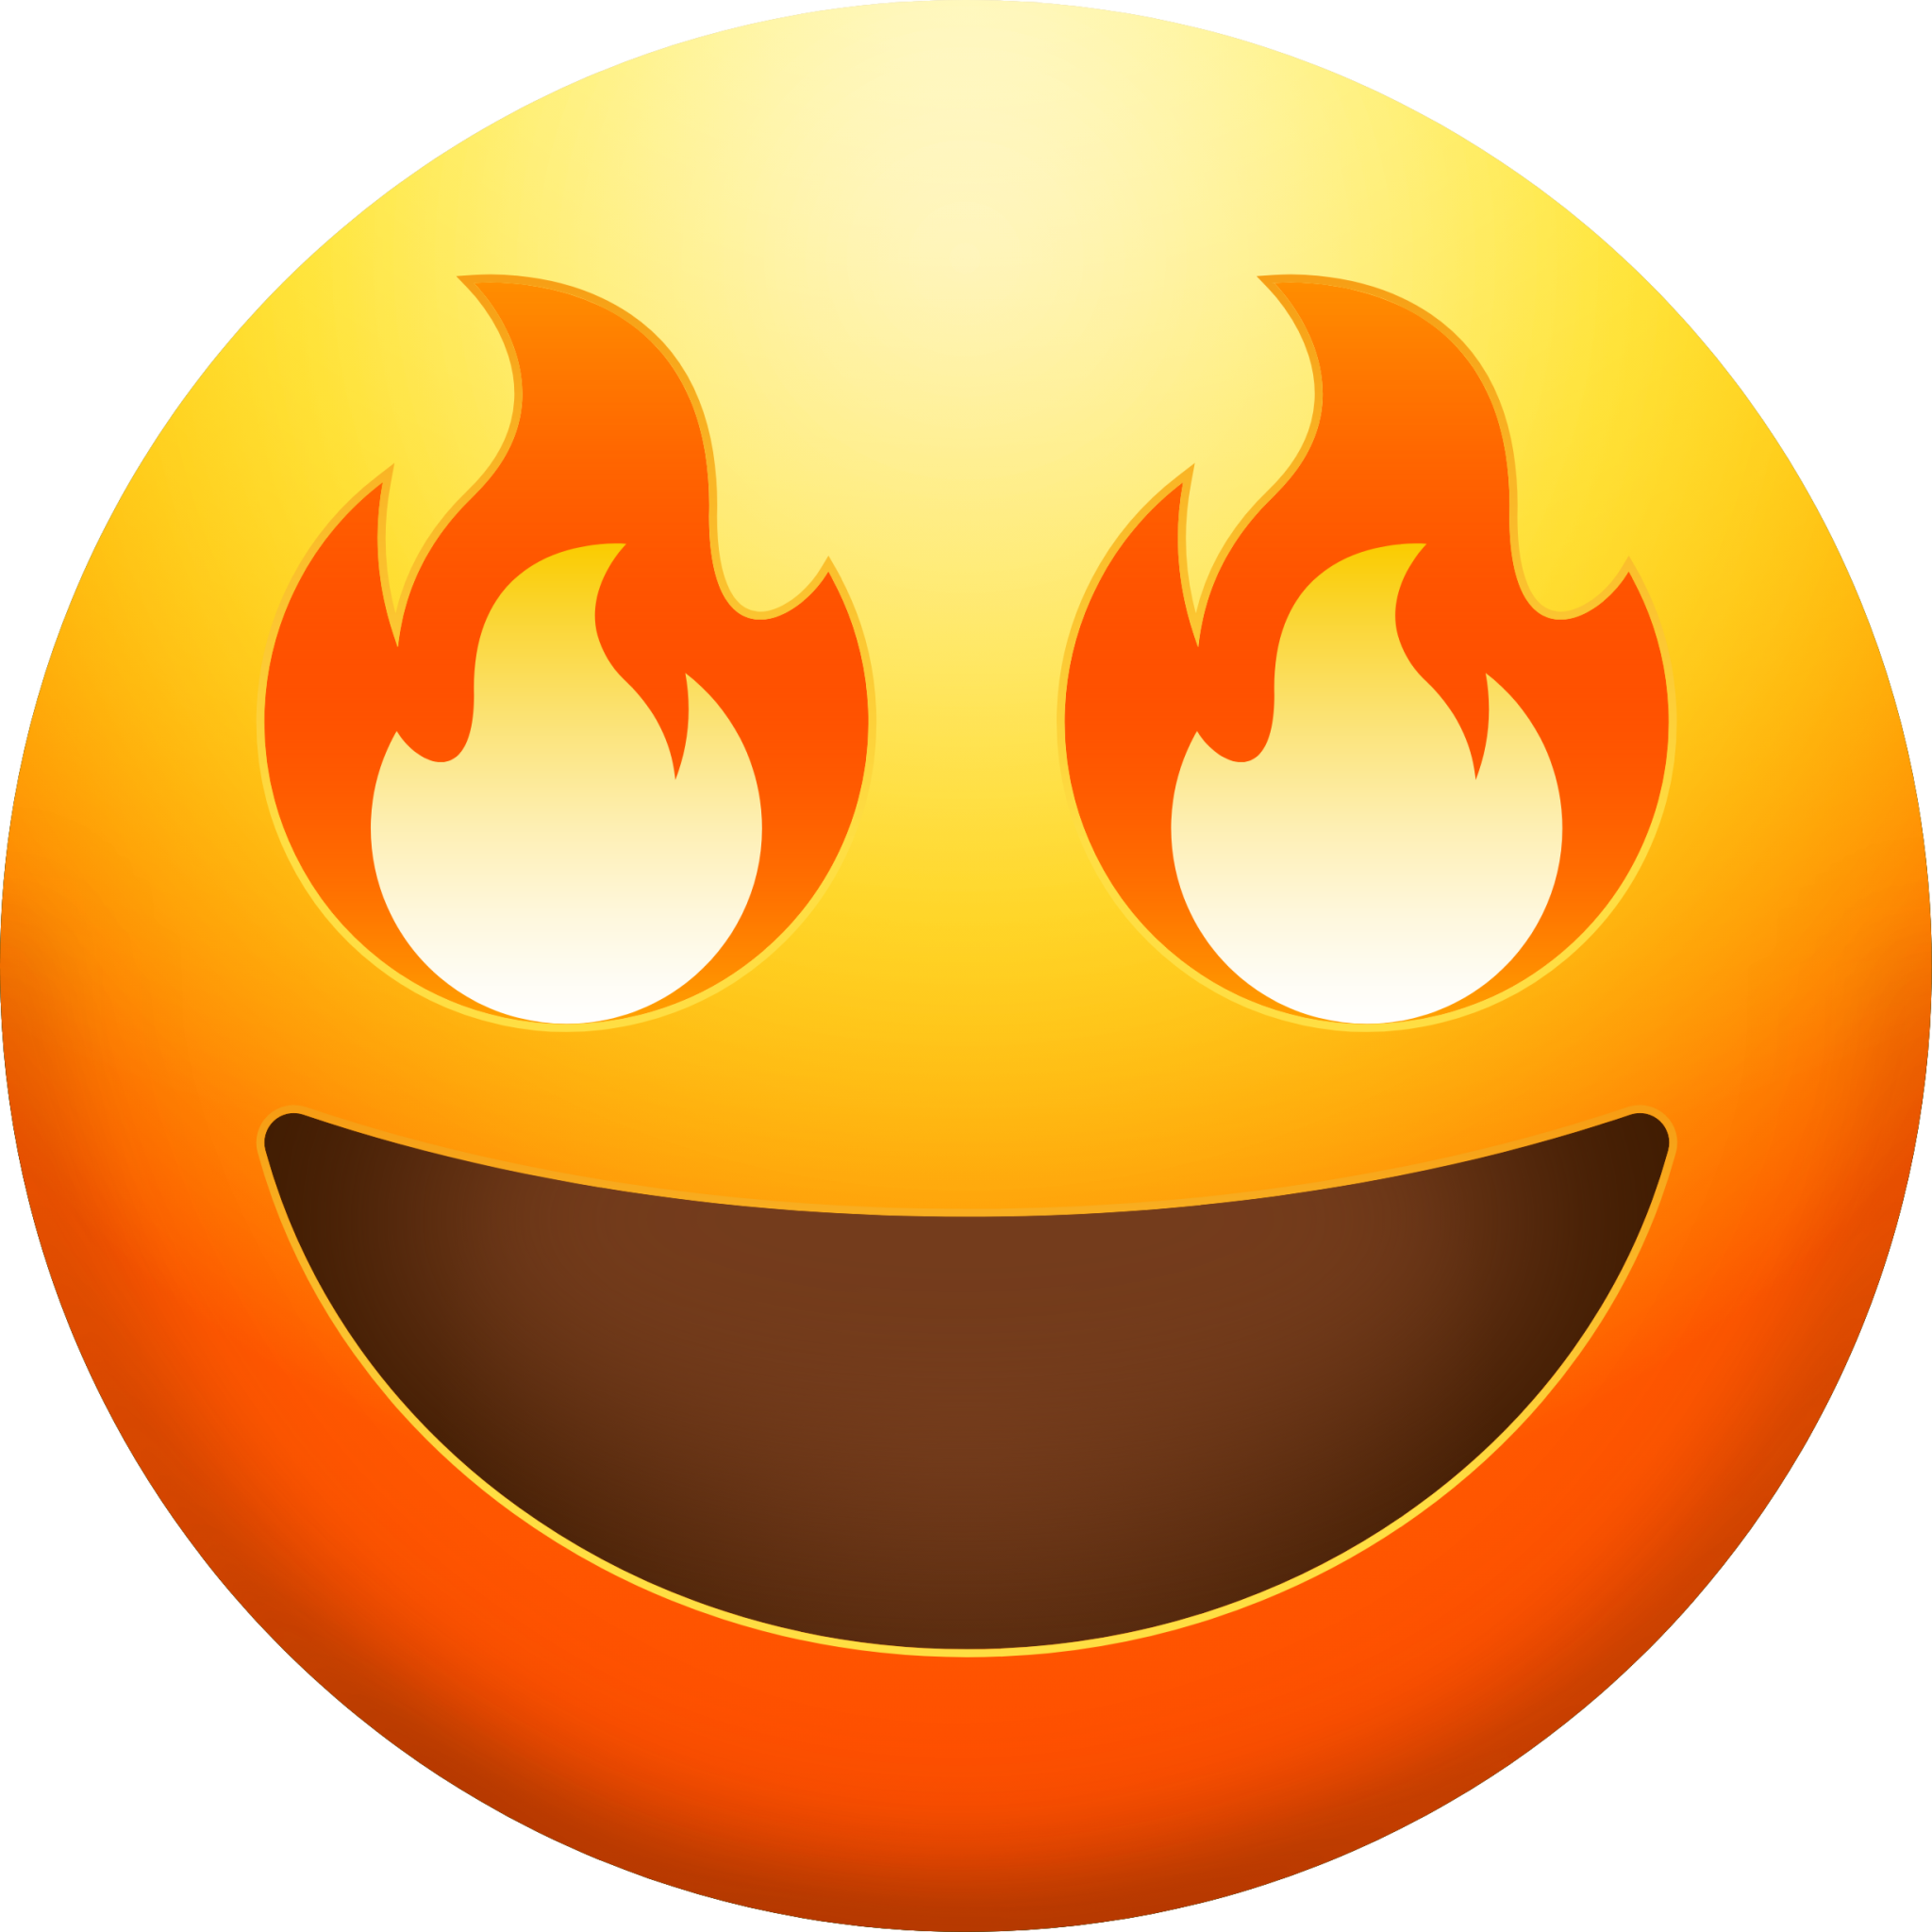 Smiling Face with Fire Eyes Emoji - Download for free – Iconduck